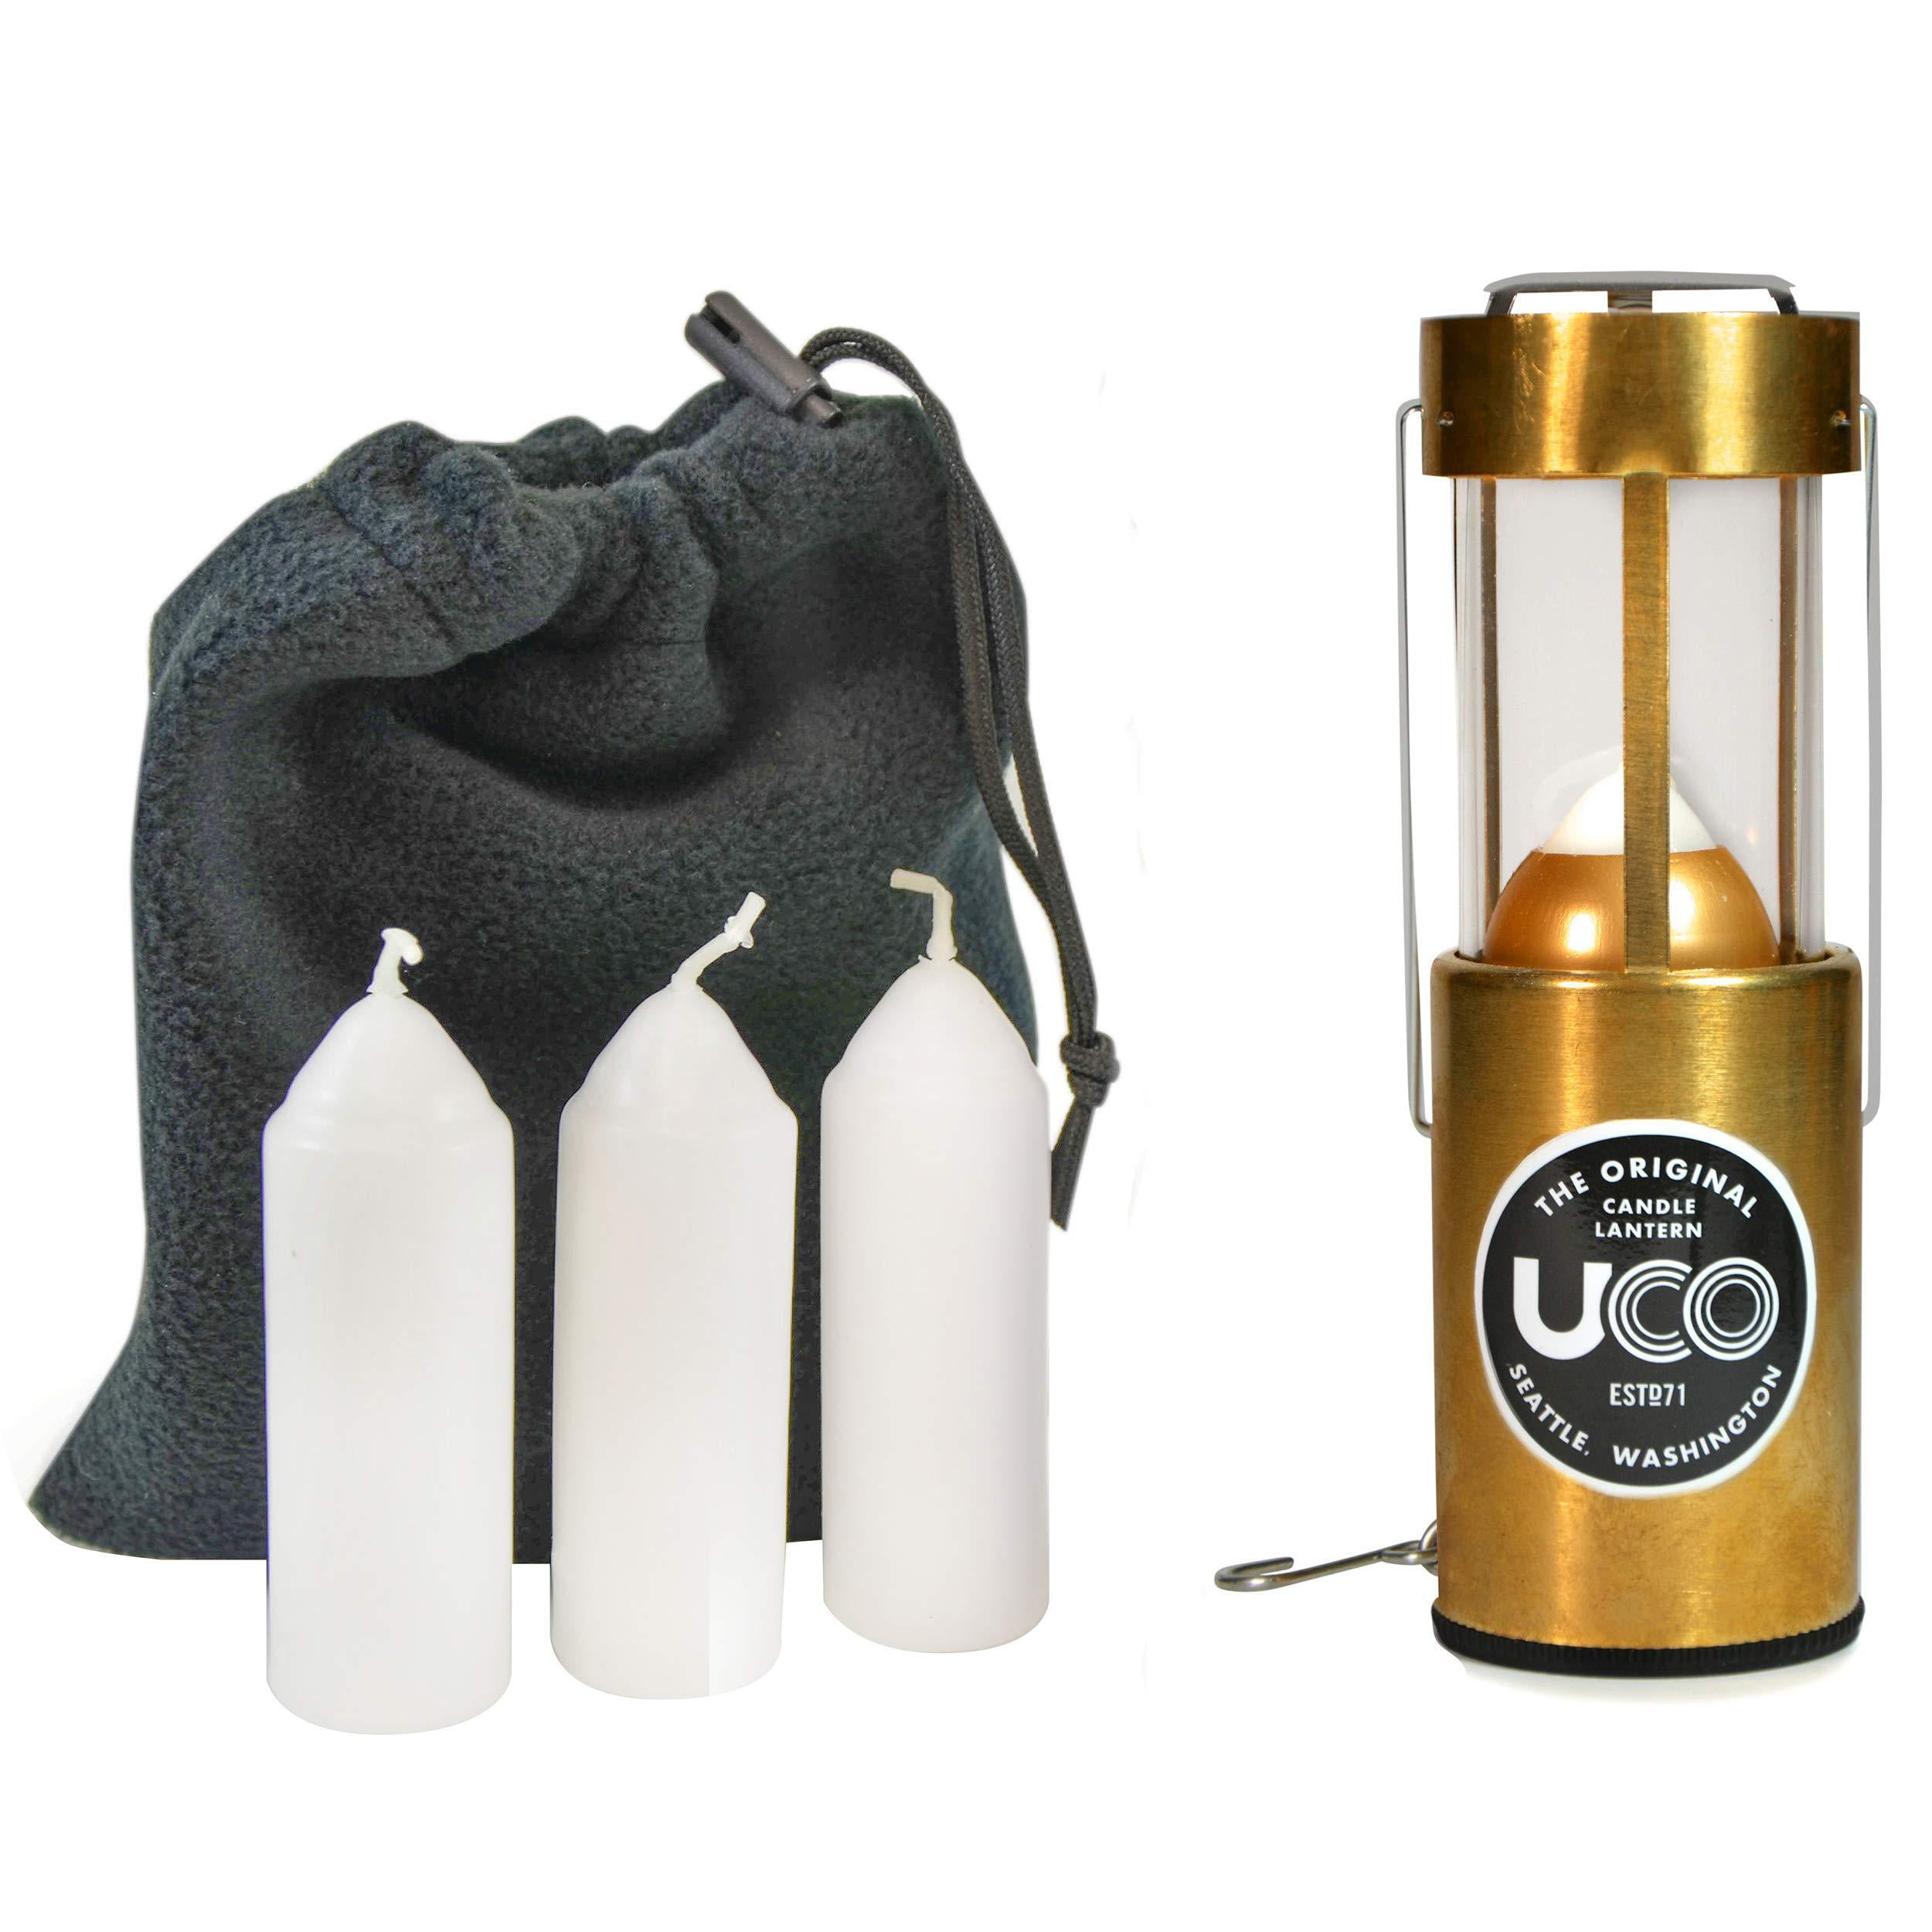 UCO Original Candle Lantern Value Pack with 3 Candles and Storage Bag 